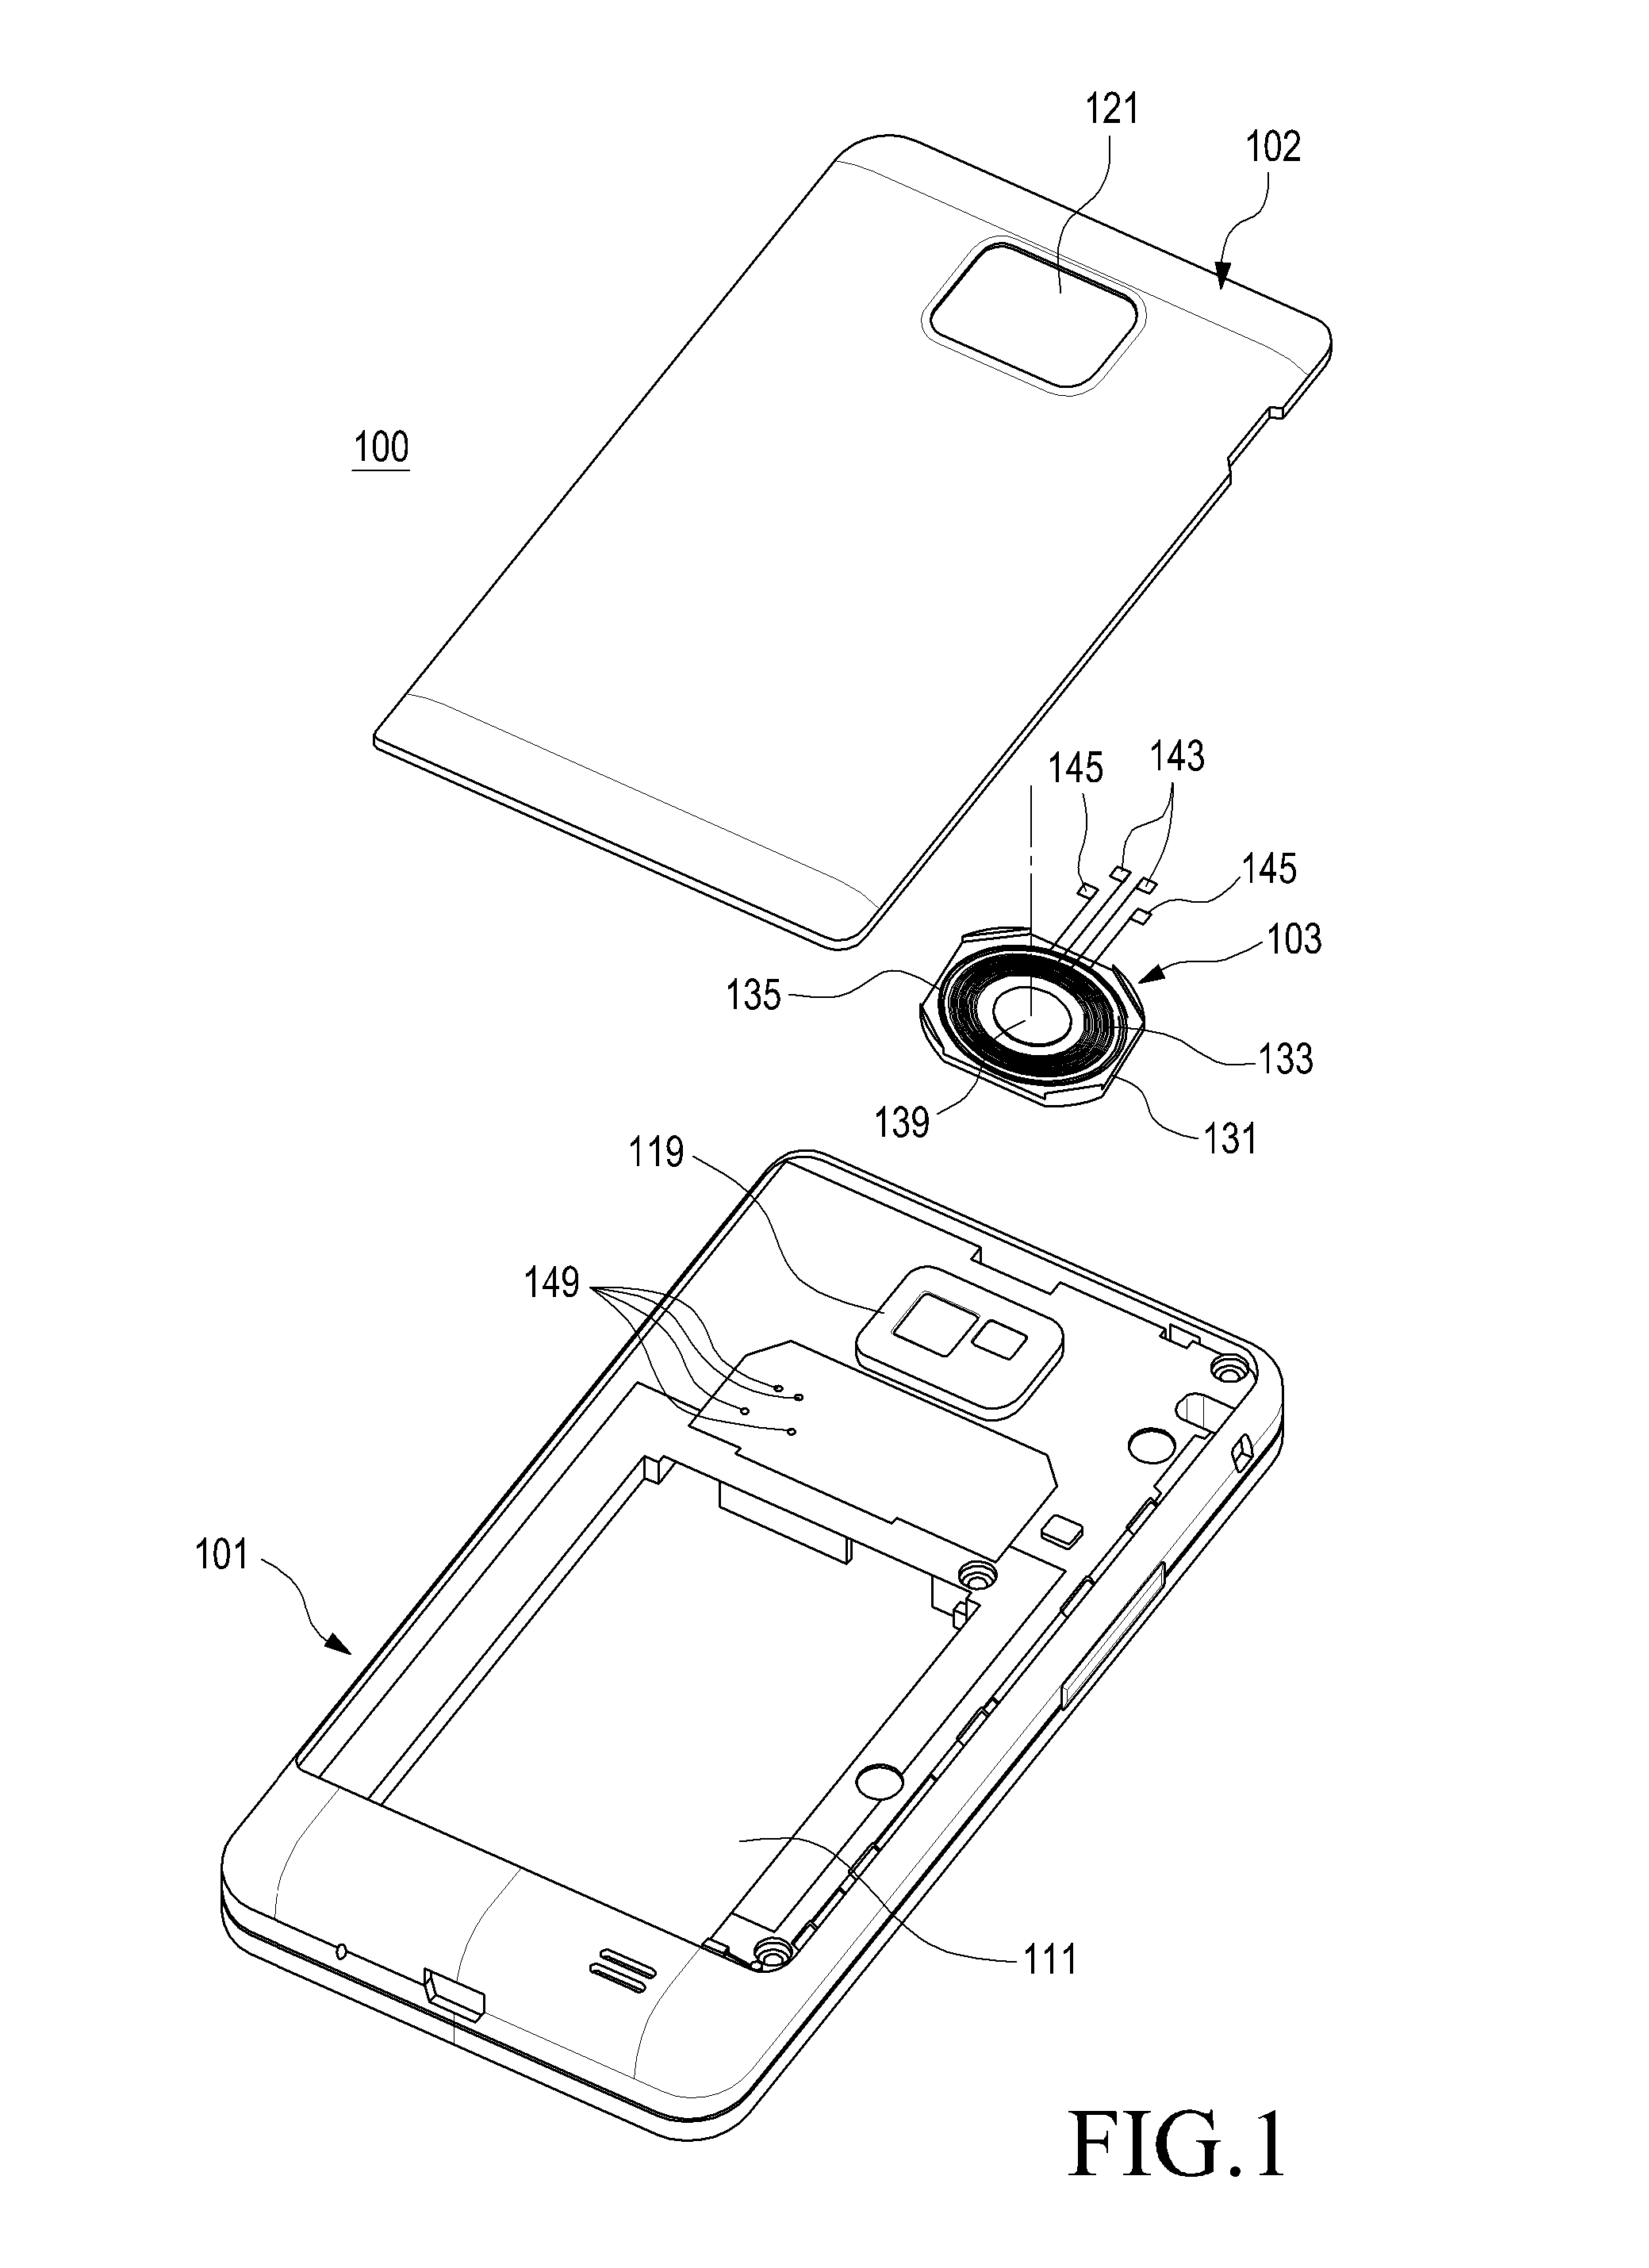 Portable terminal having a wireless charger coil and an antenna element on the same plane